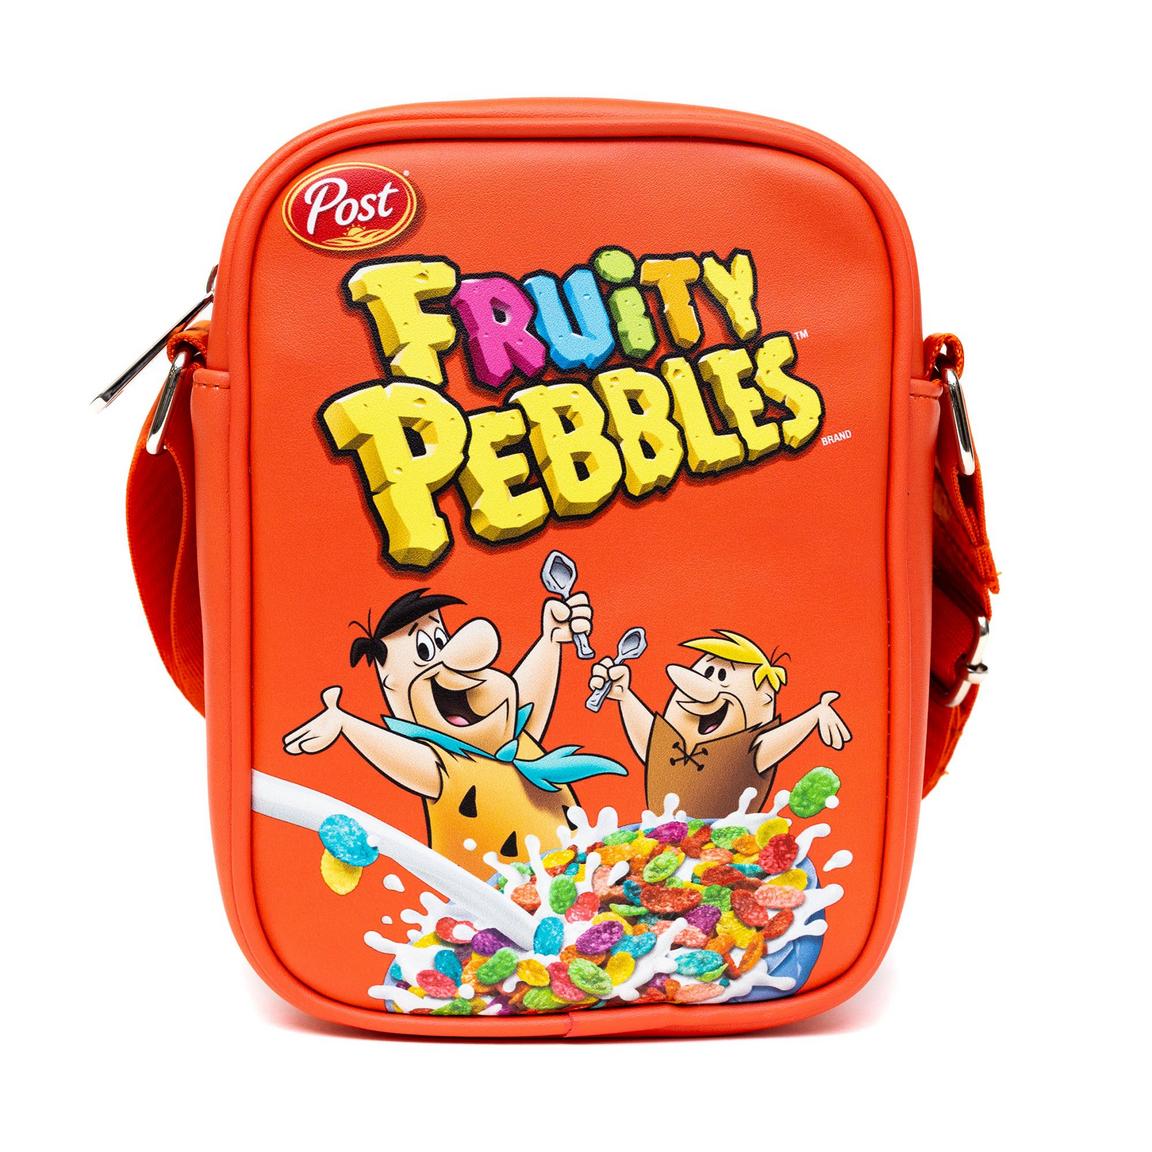 Buckle-Down The Flintstones Fruity Pebbles Polyurethane Crossbody Bag with Piping Edge and Cell Phone Pocket, Size: One Size, Buckle Down